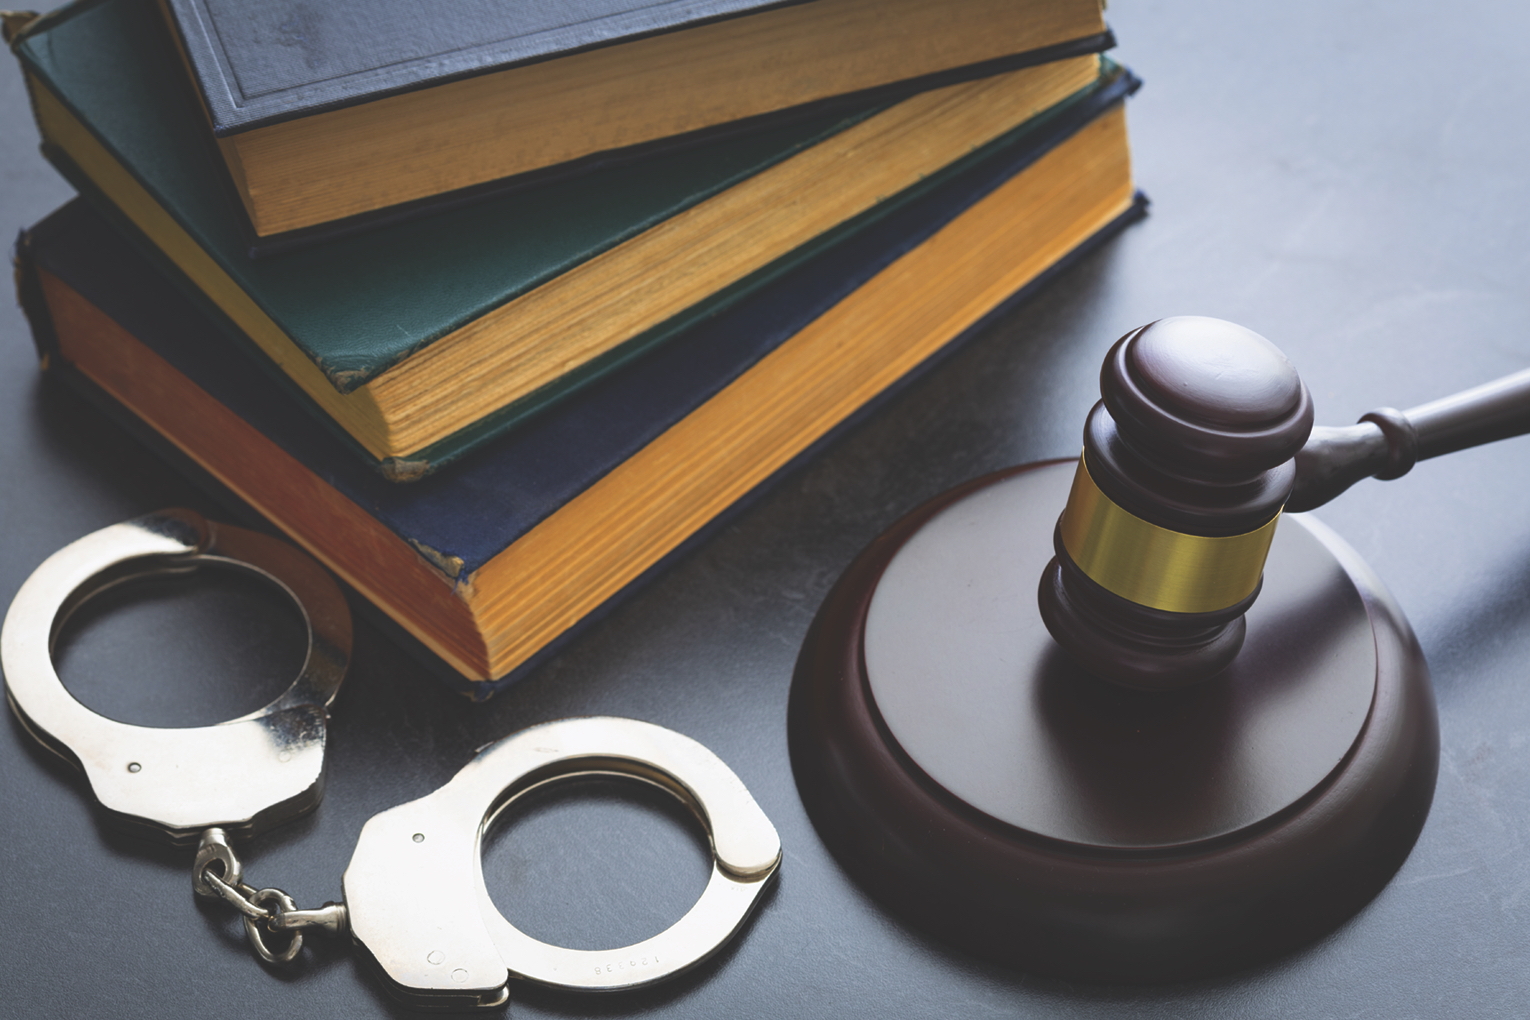 A stock image showing a pair of handcuffs next to a judicial gavel surrounded by important looking books